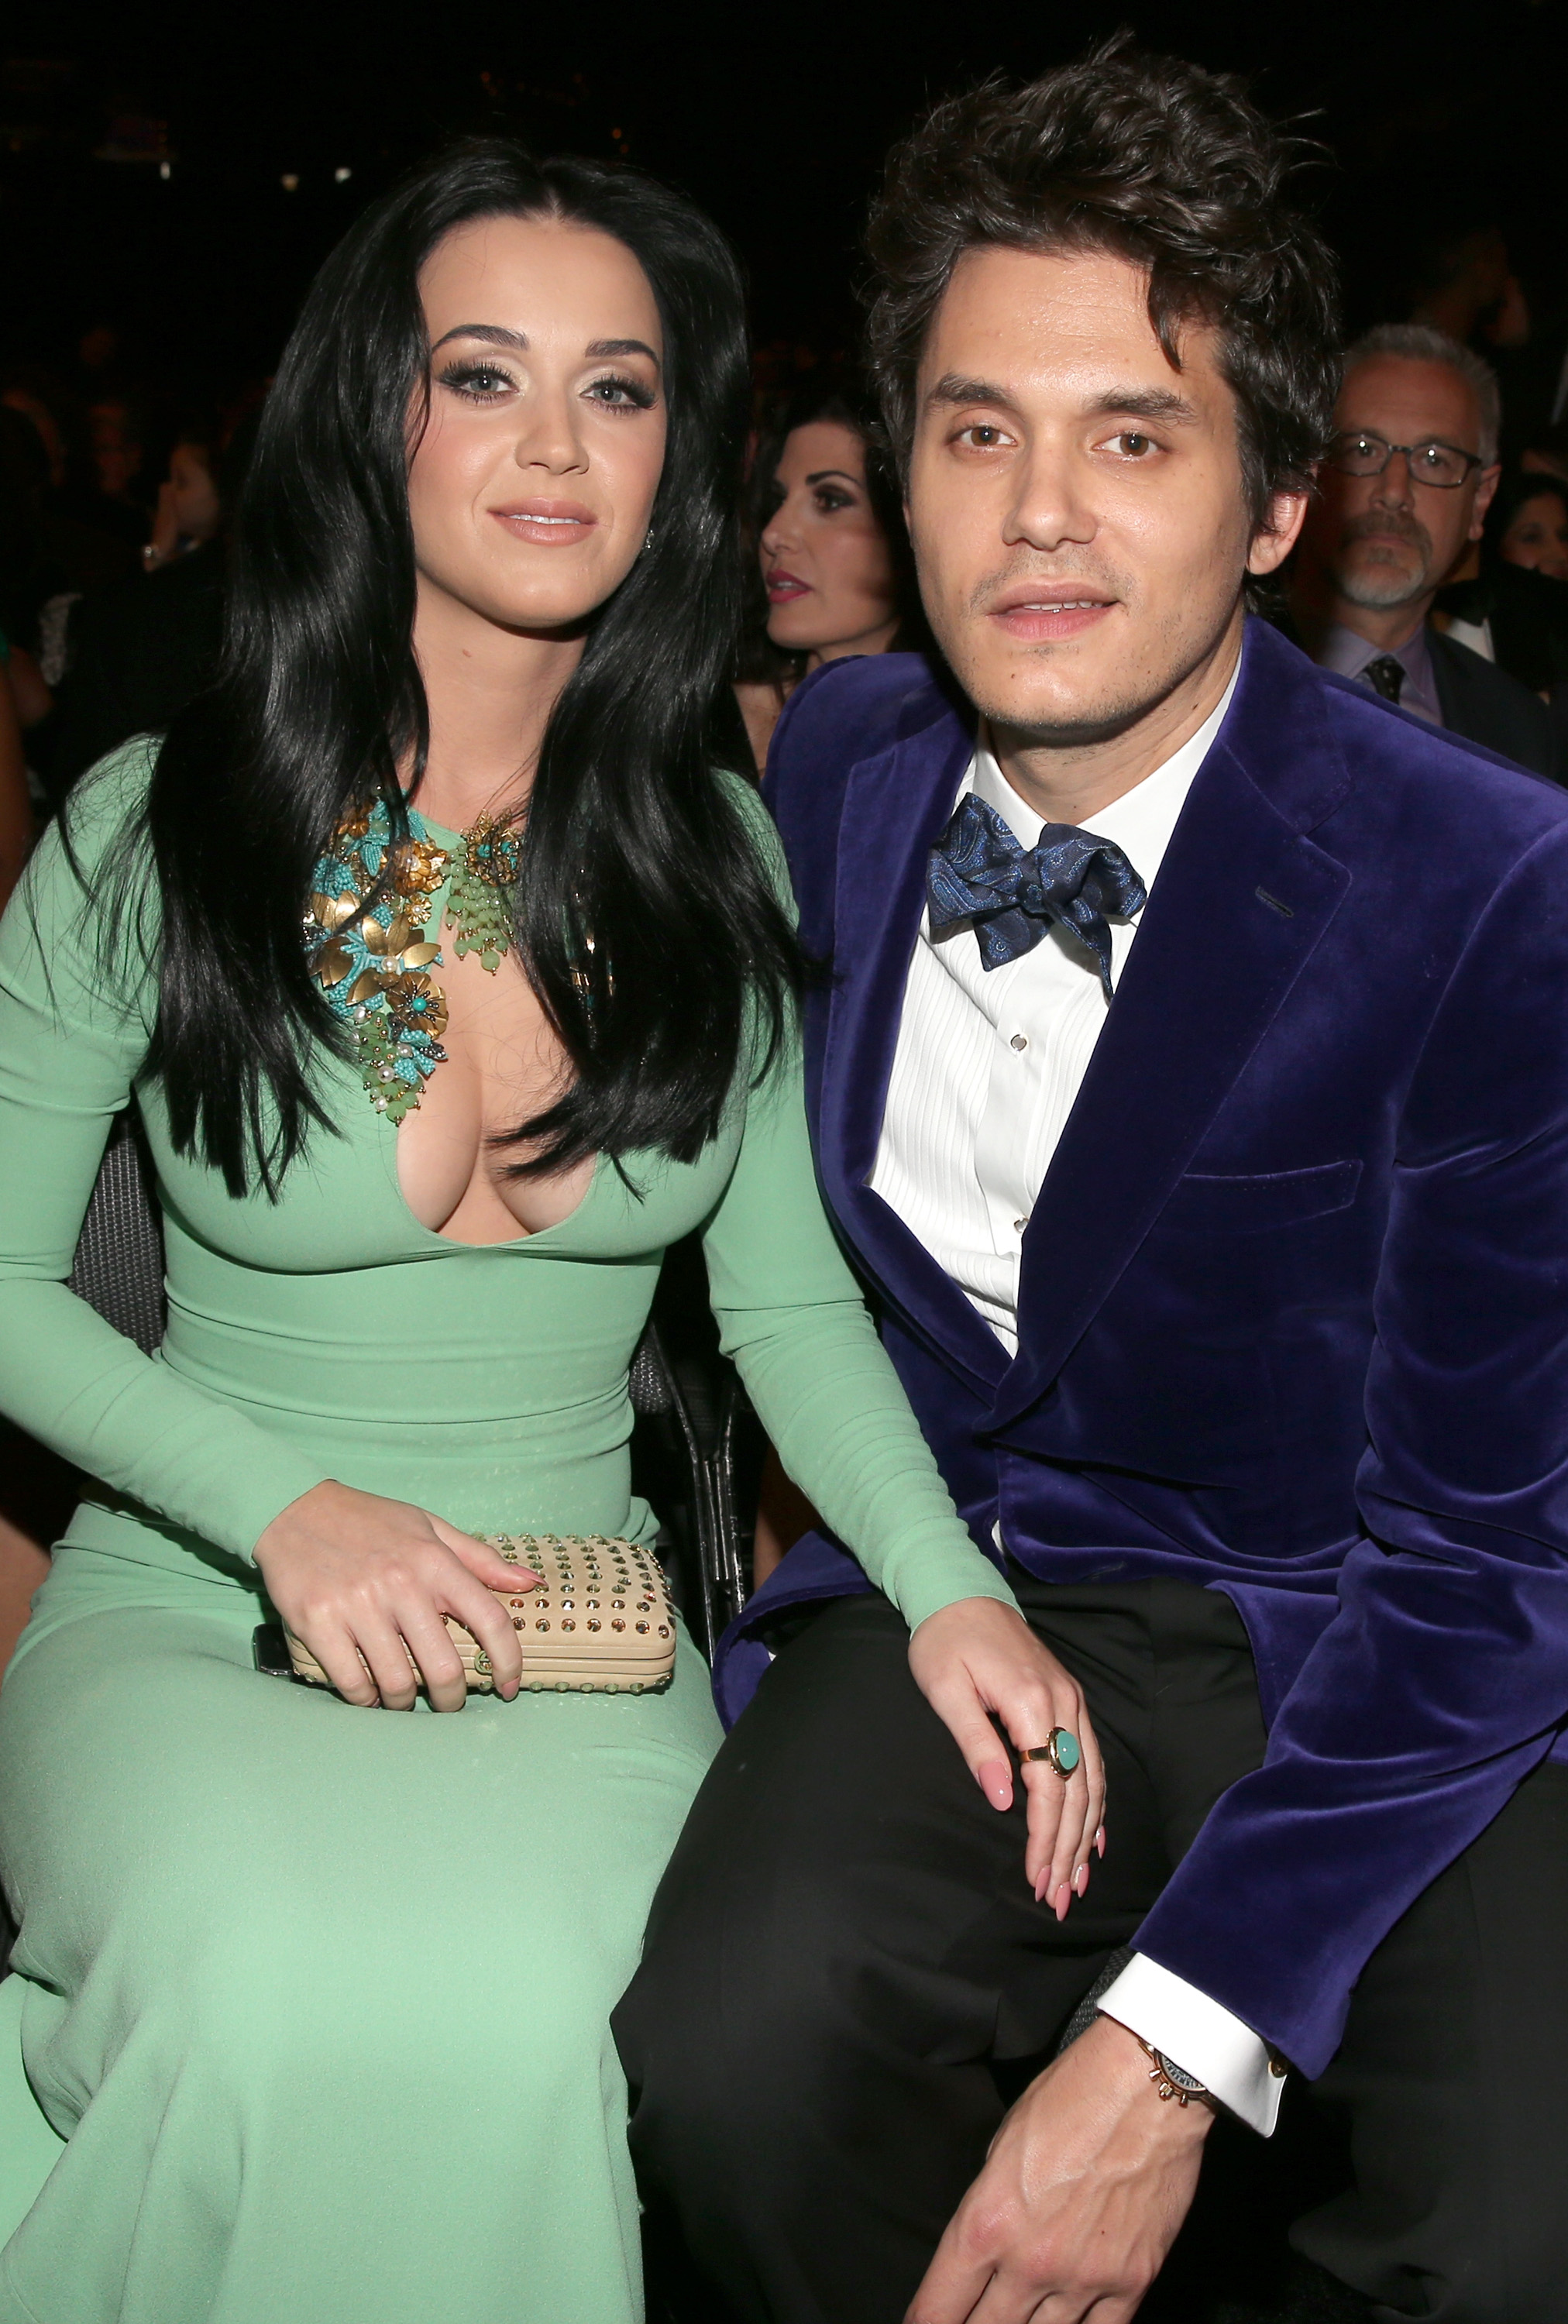 Singer Katy Perry and musician John Mayer attend the 55th Annual GRAMMY Awards at STAPLES Center on February 10, 2013 in Los Angeles, California | Source: Getty Images